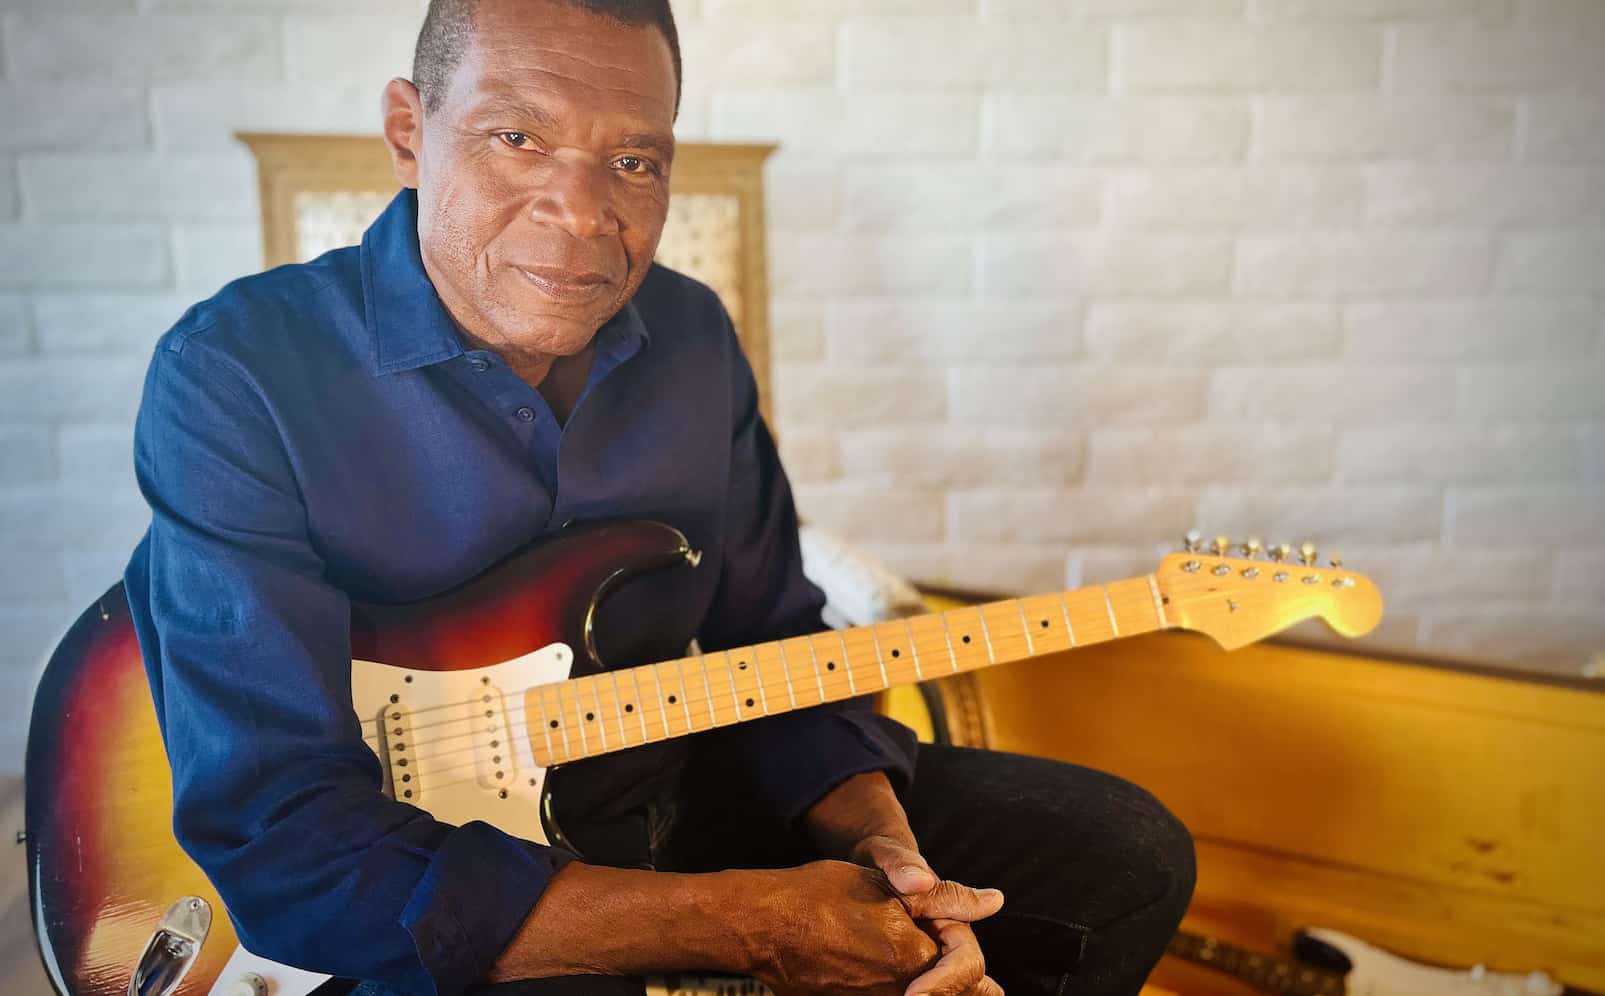 Blues Hall of Famer Robert Cray has created a sound that rises from American roots, blues, soul and R&B, with five Grammys. Press photo courtesy of the Mahaiwe Performing Arts Center